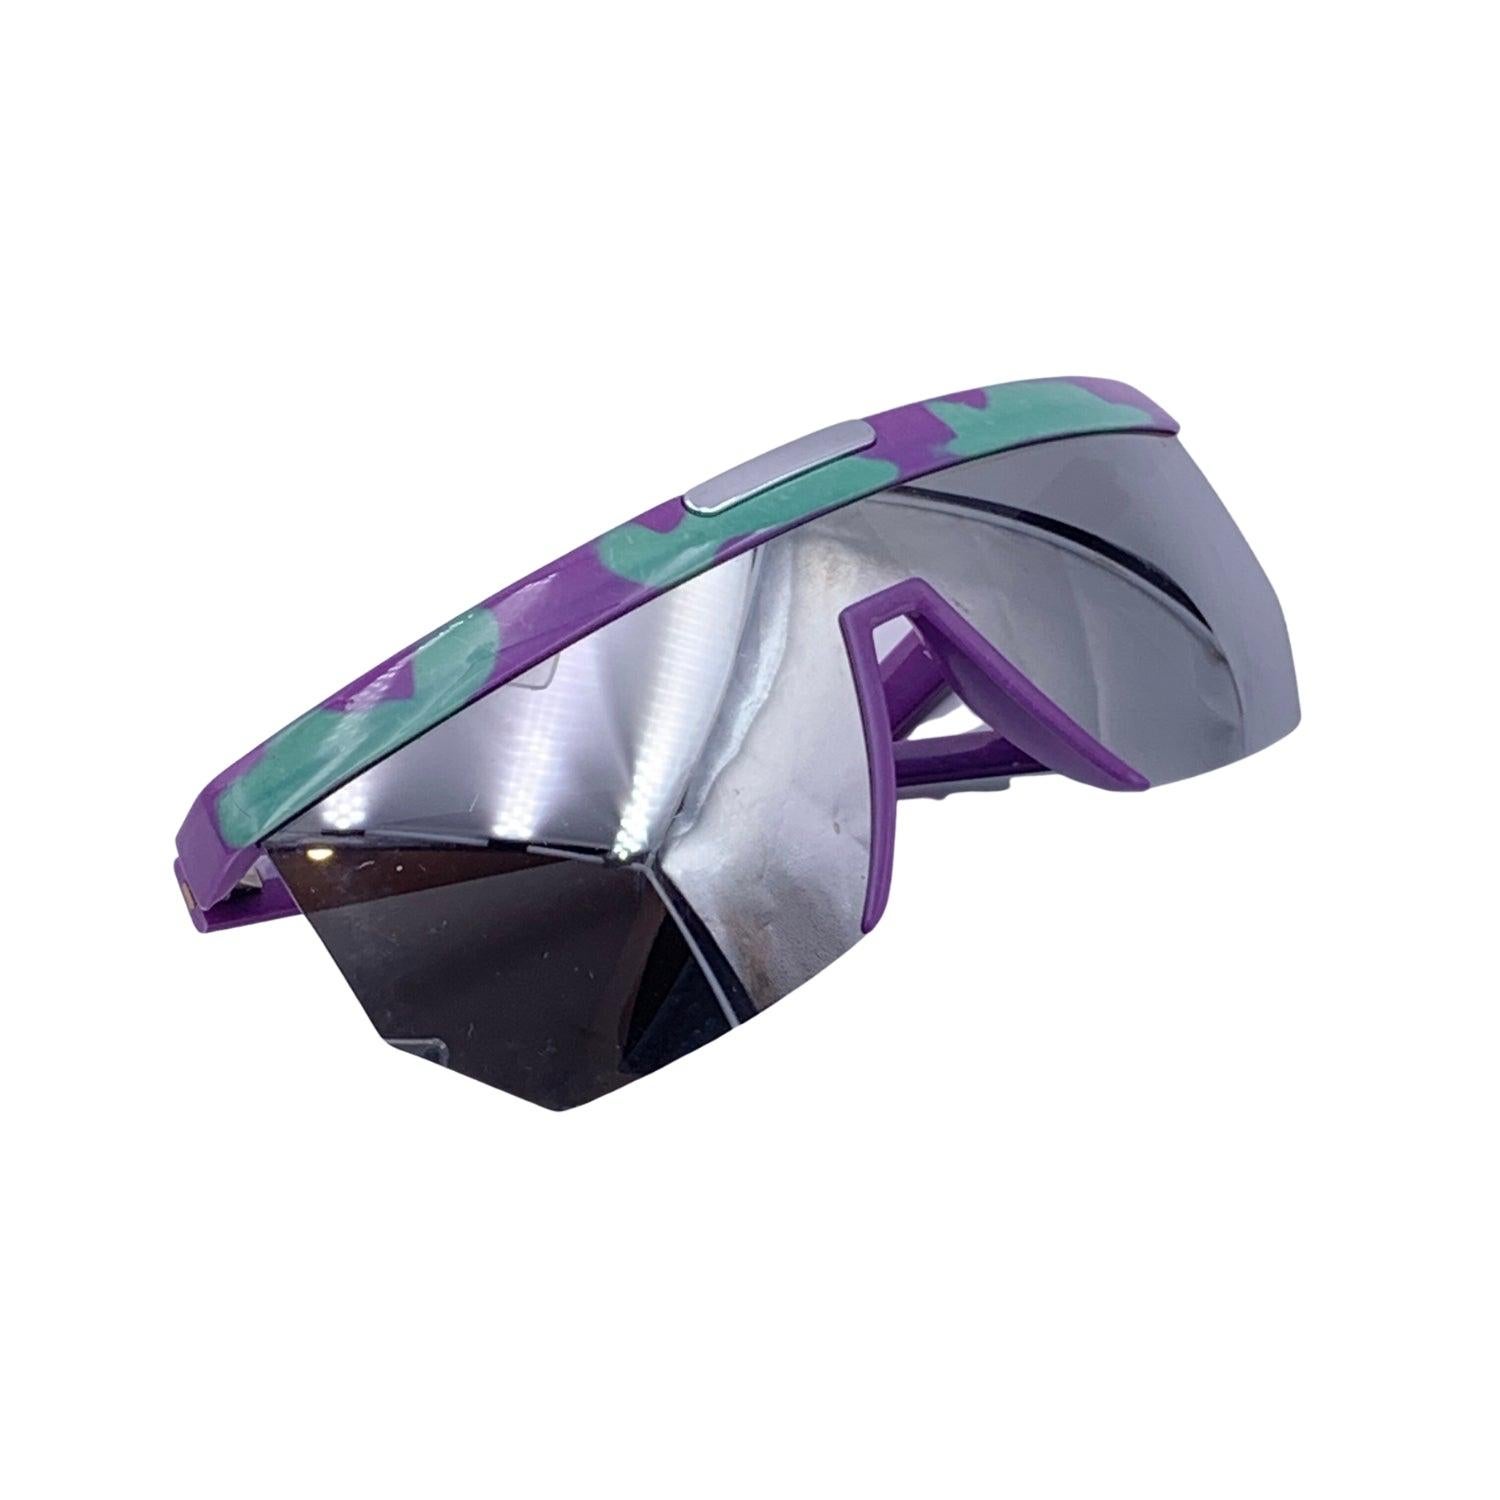 Silhouette Vintage Sunglasses. Model: M 3077/10. Size: 66/12 125mm. Purple and light green acetate frame and temples. 100% Total UVA/UVB protection. Mirrored lenses. Details MATERIAL: Plastic COLOR: Purple MODEL: 3077 GENDER: Unisex Adults COUNTRY